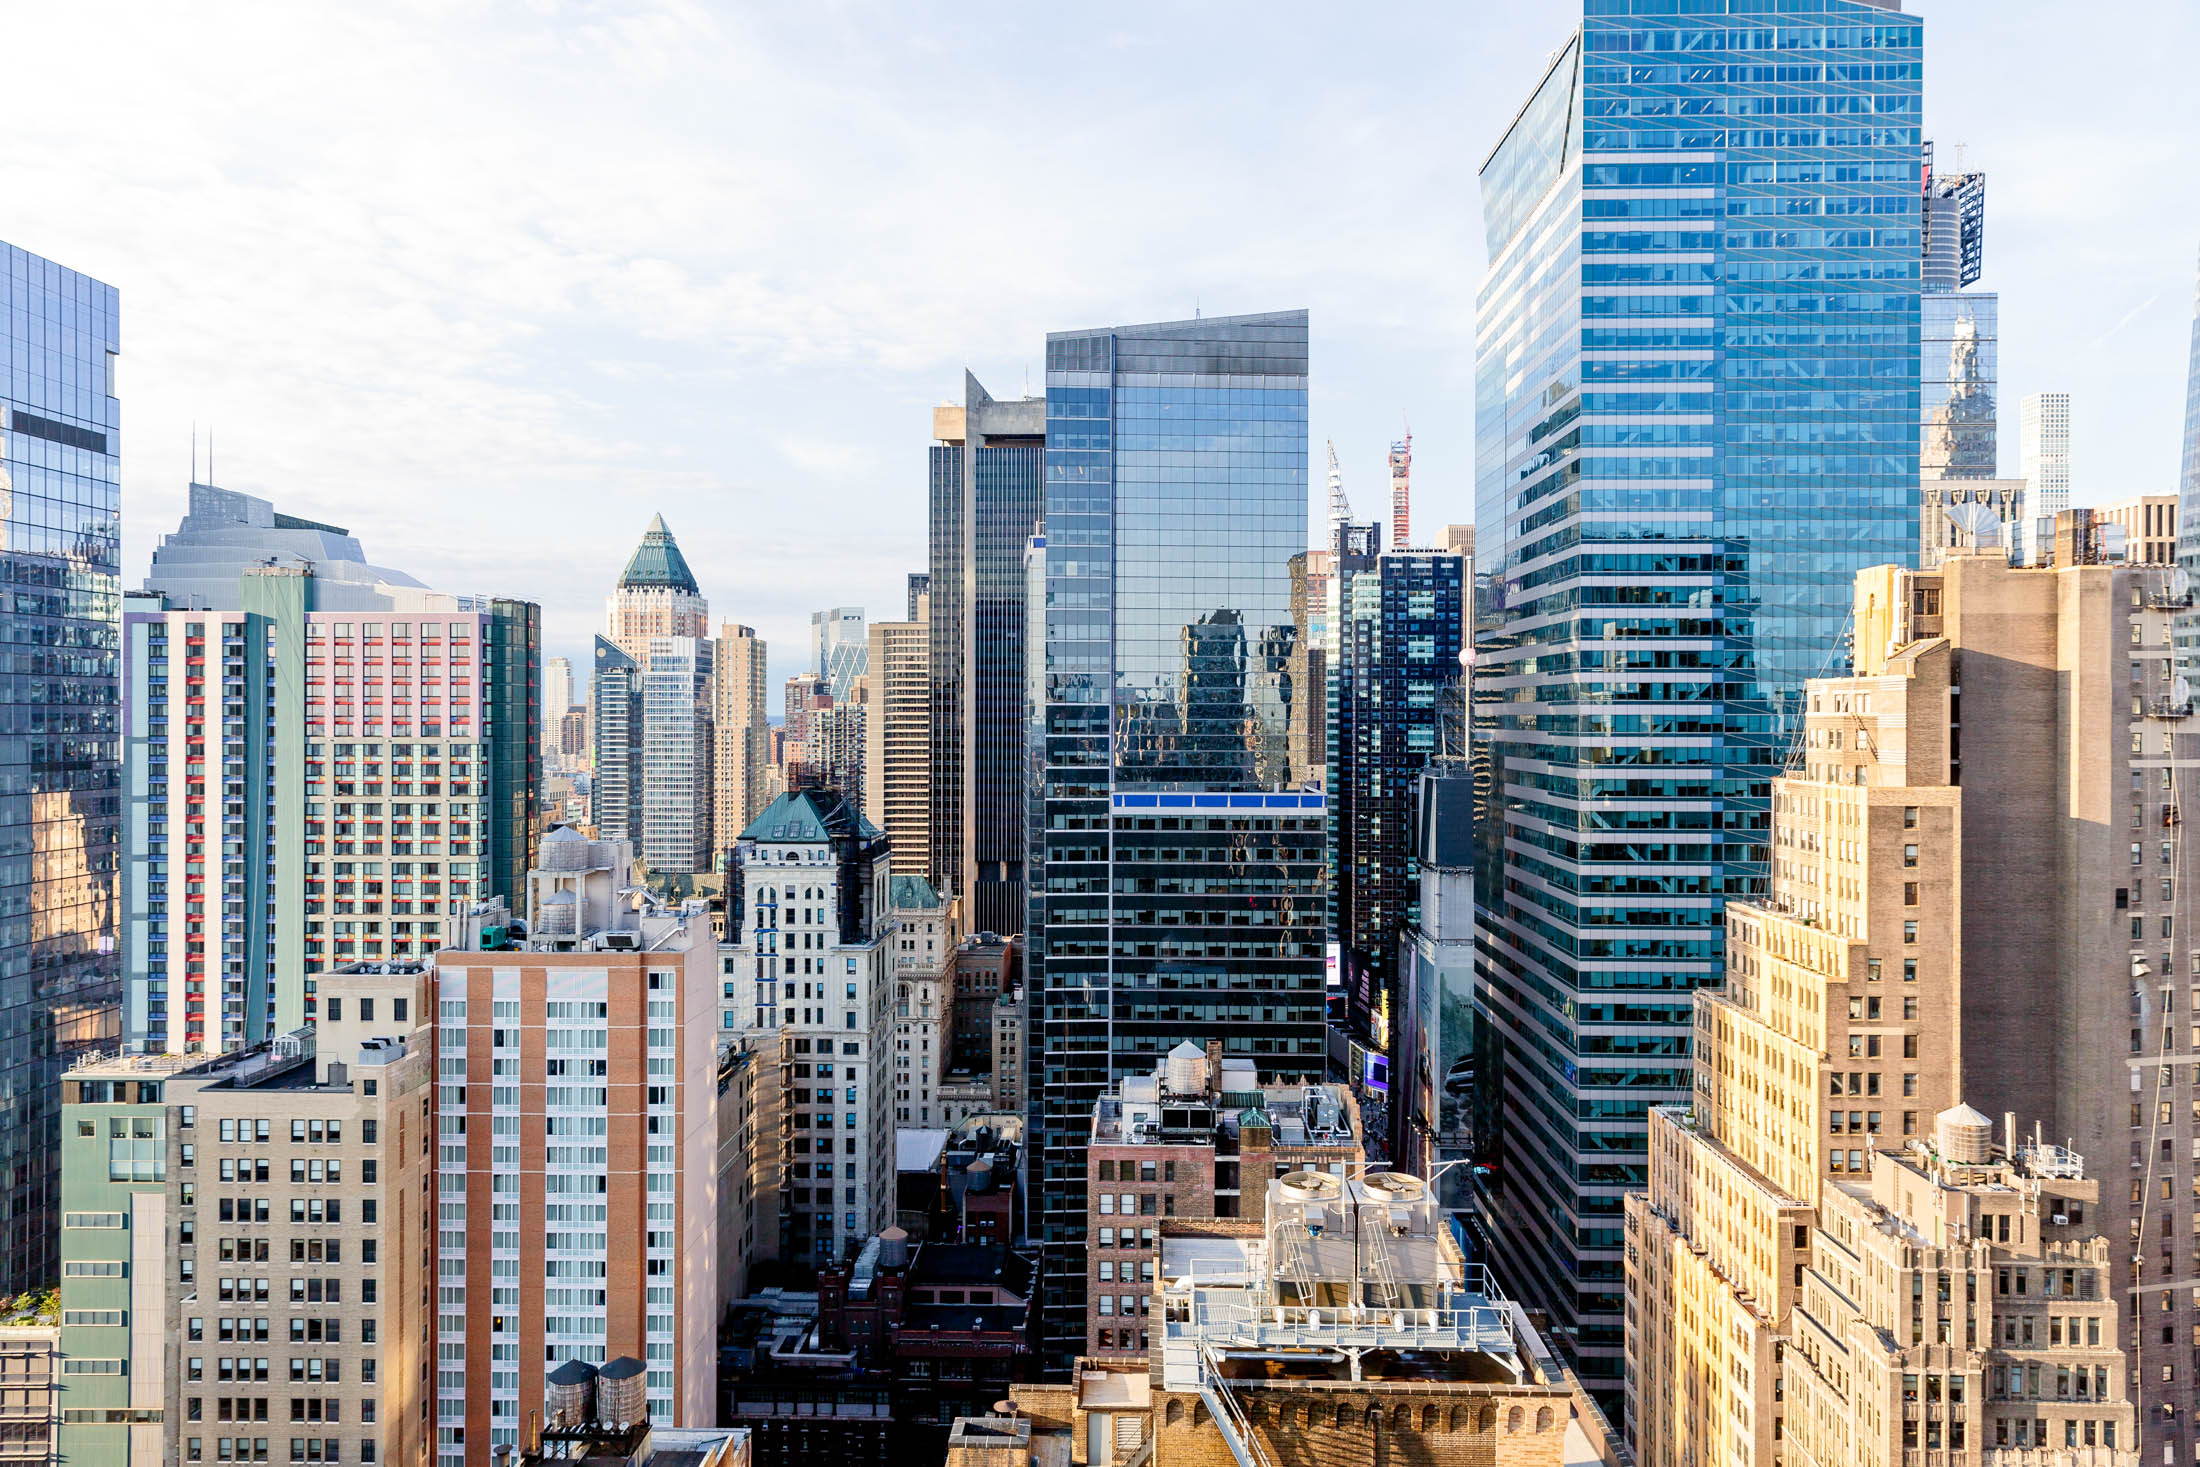 New York’s home prices could go even lower, according to StreetEasy.